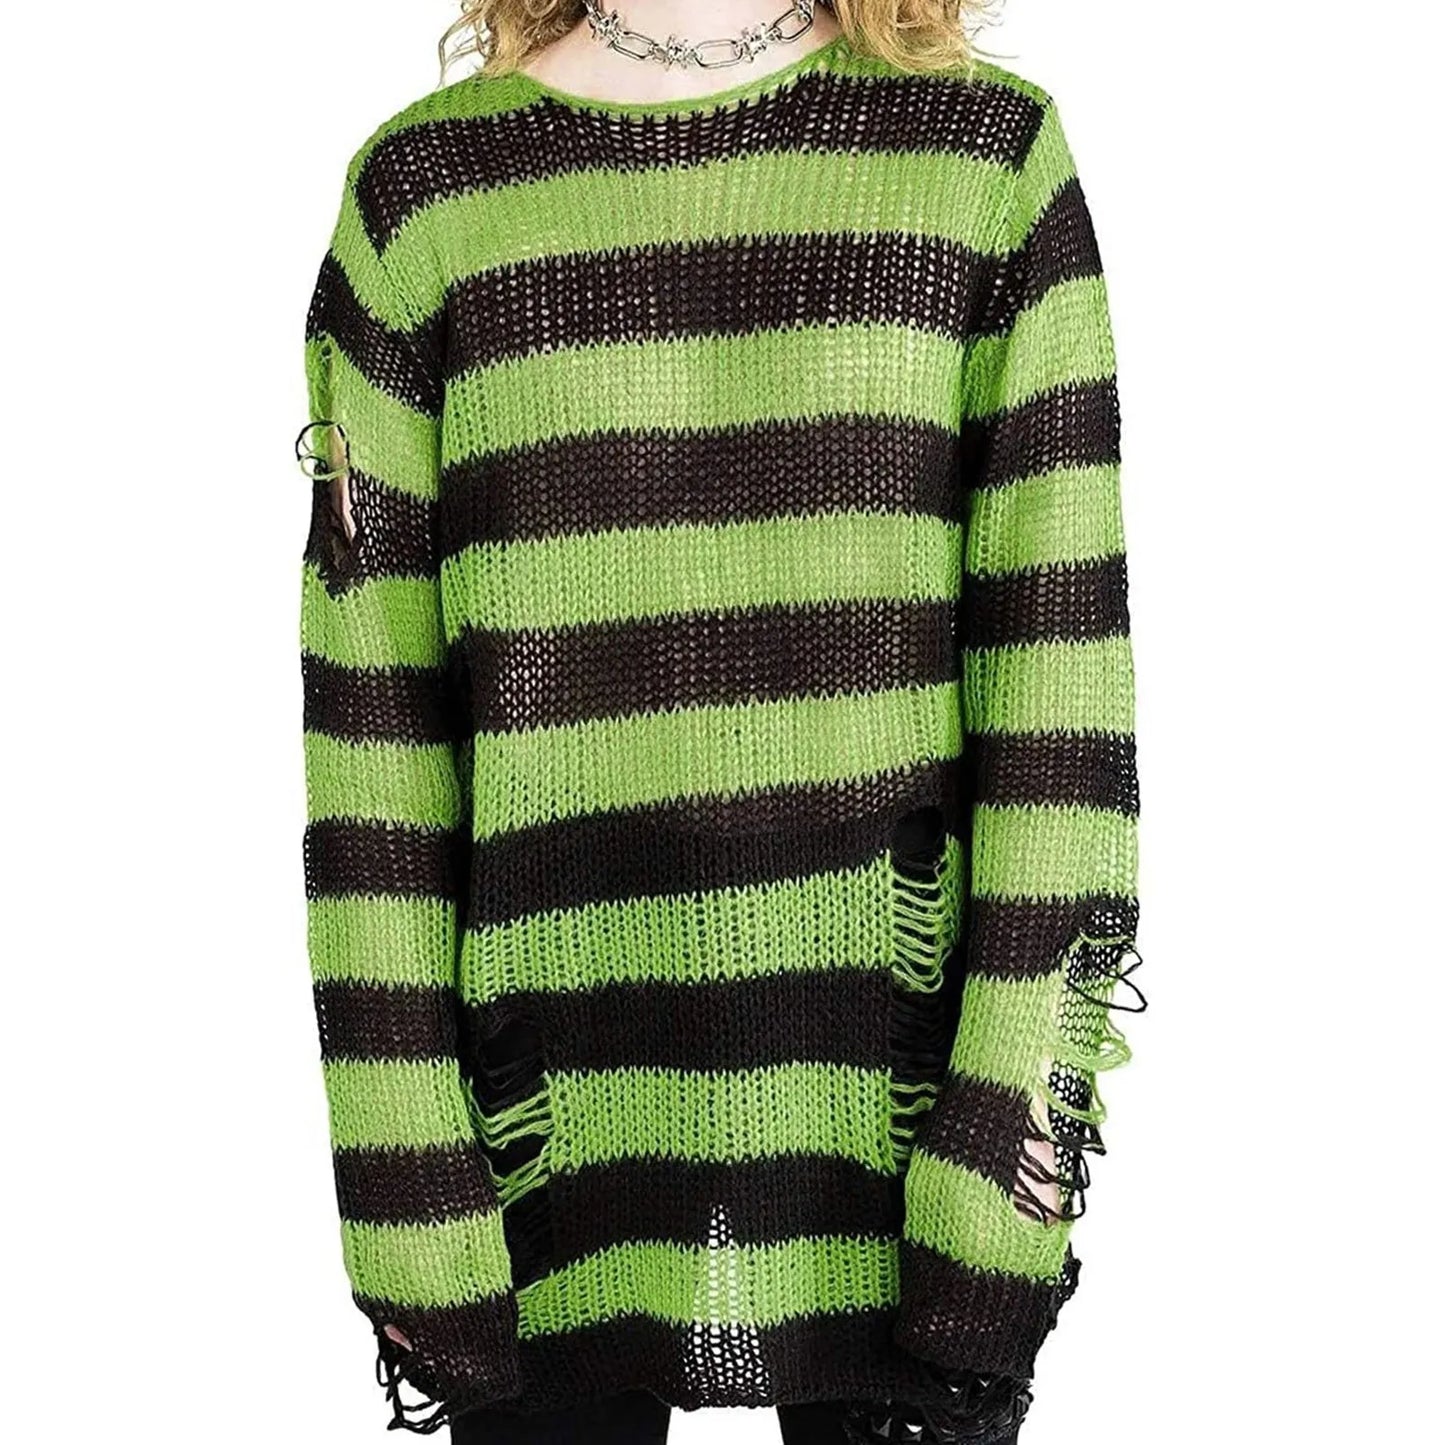 Astral Shred Long Sleeve Sweater - A Gothic Universe - Sweaters